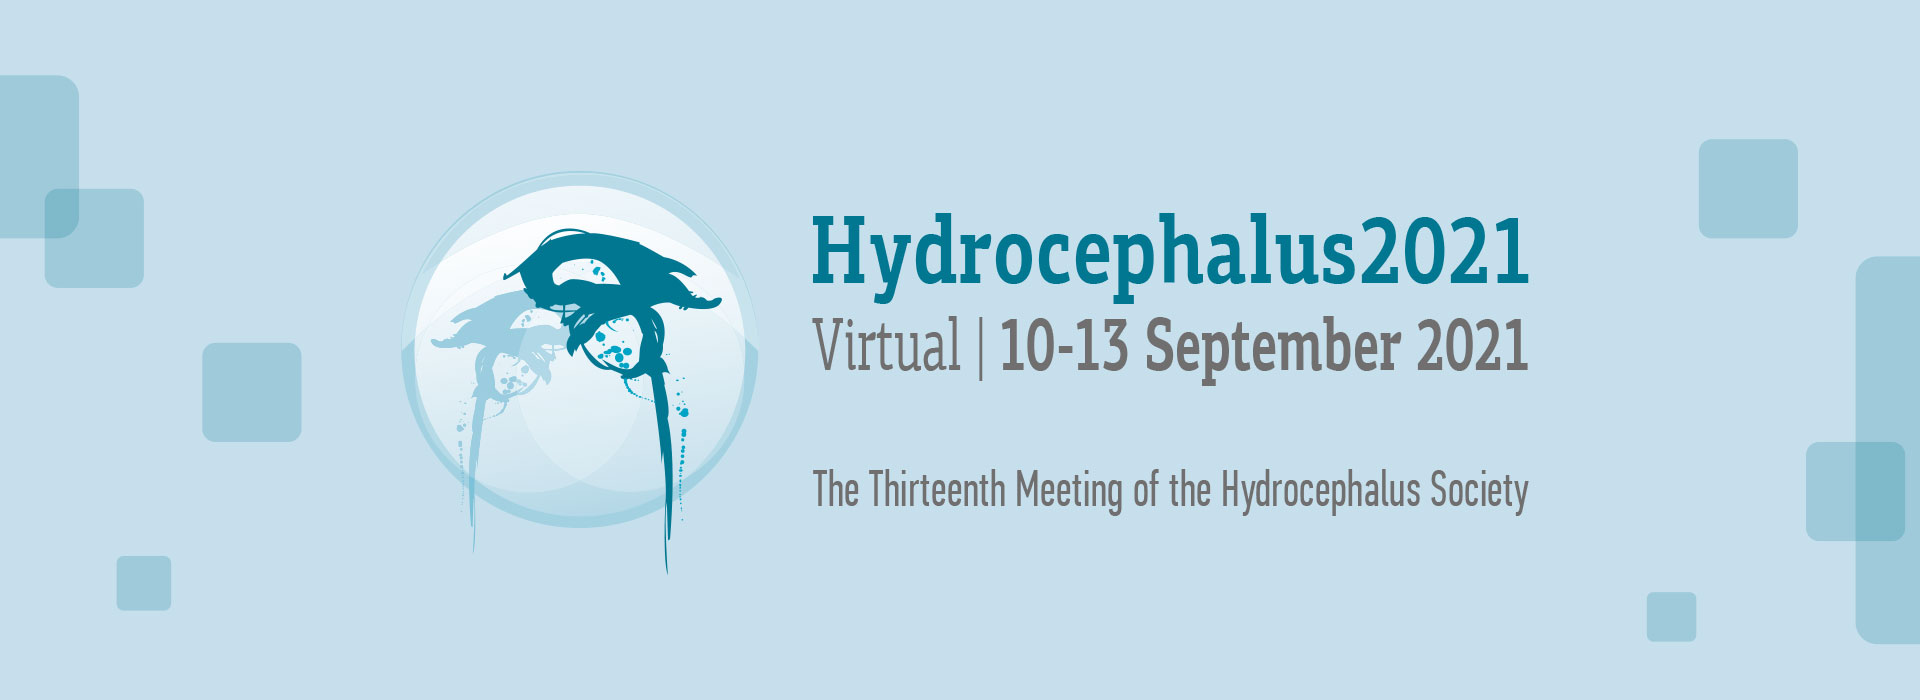 Hydrocephalus 2021 Abstracts are published on Fluids and Barriers of the CNS!